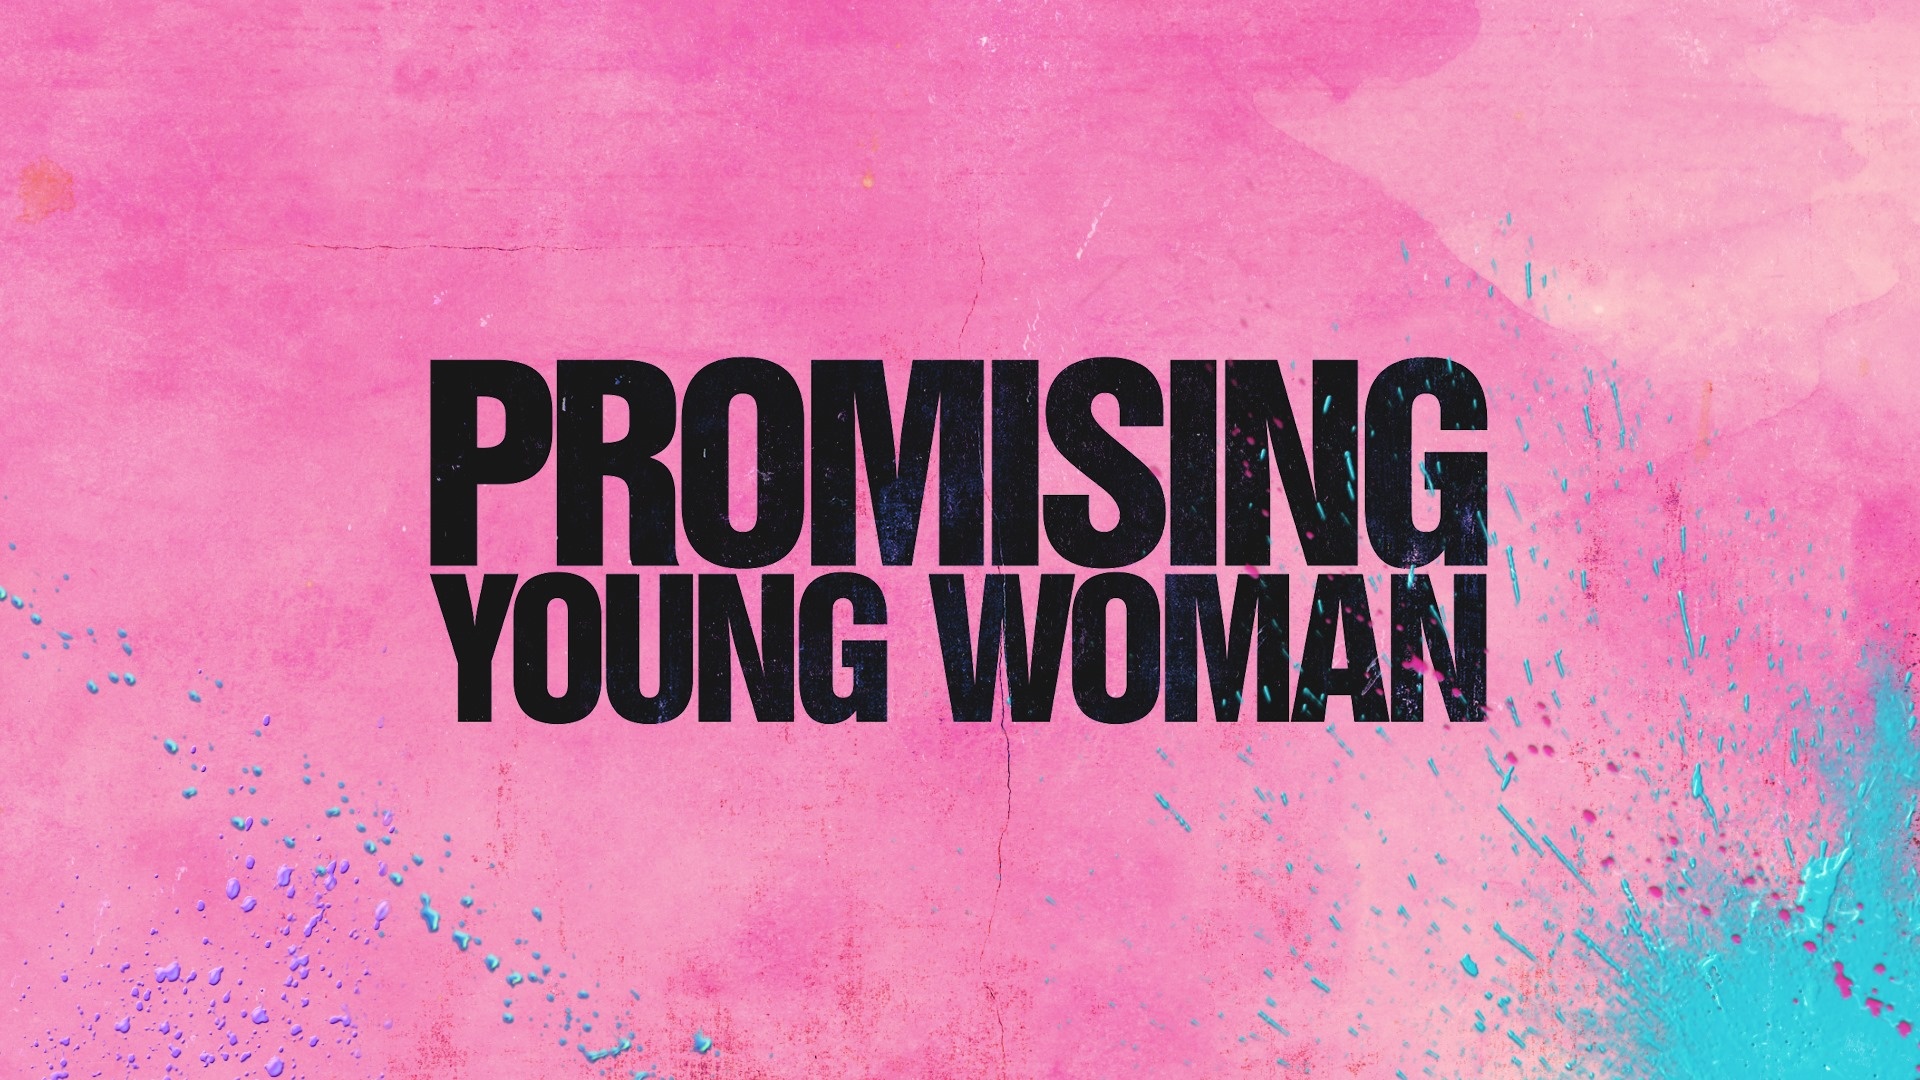 Promising Young Woman, The Noize, 1920x1080 Full HD Desktop